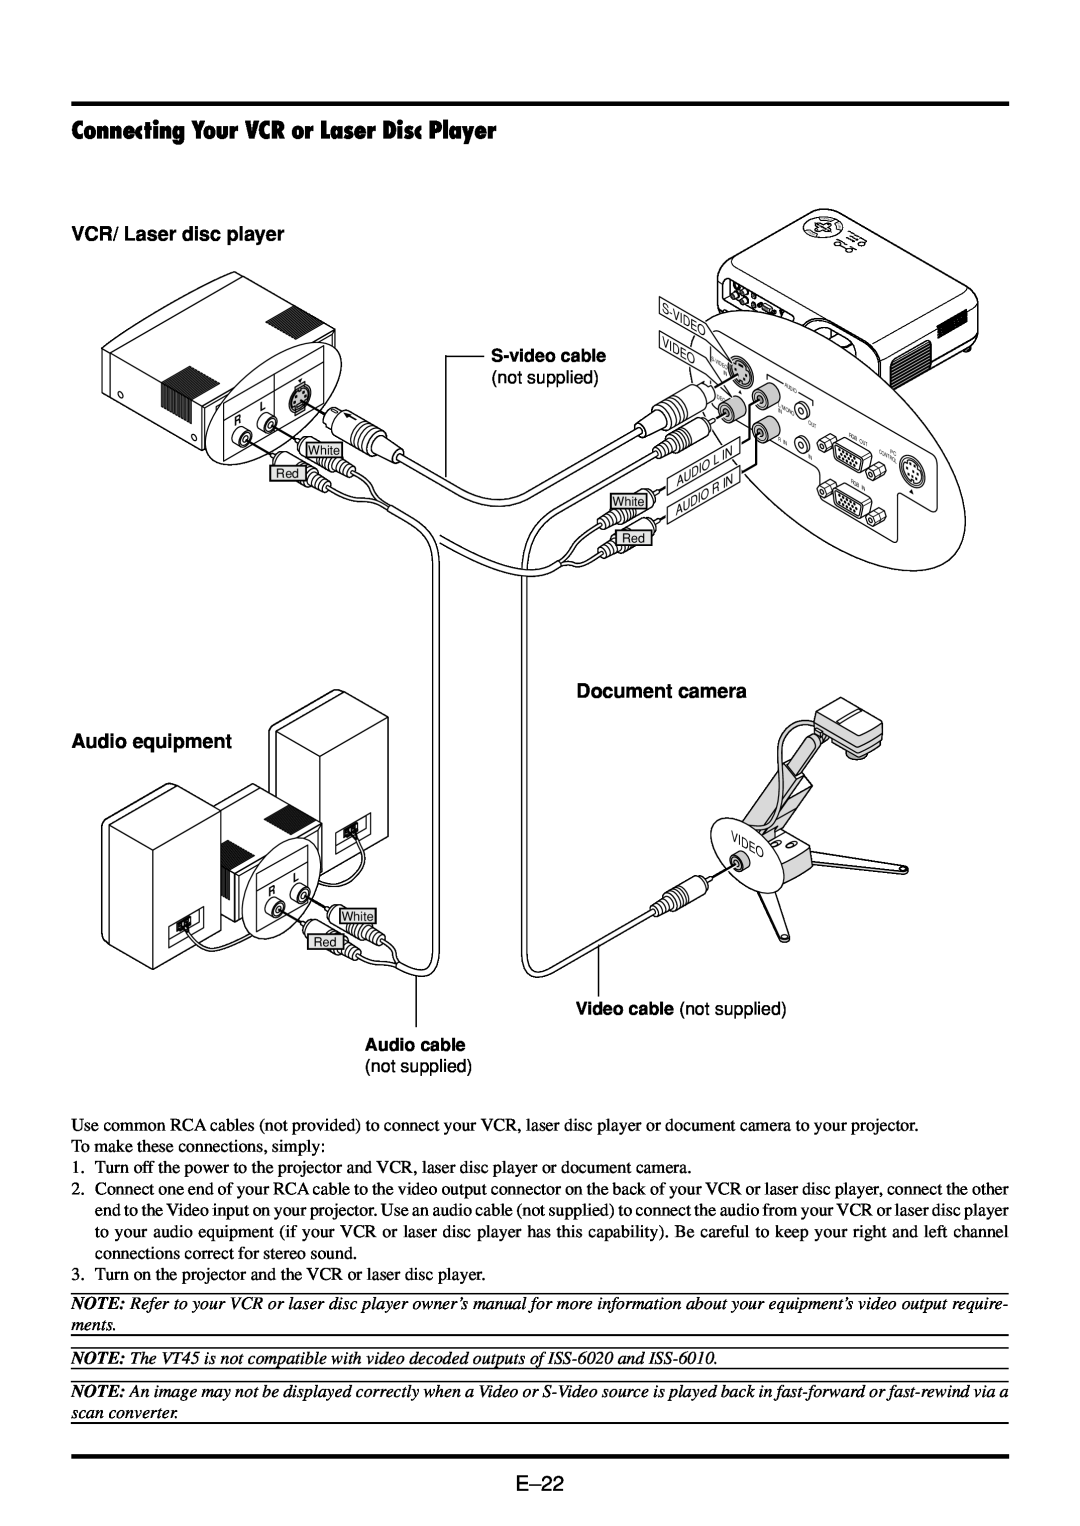 NEC VT45 user manual Connecting Your VCR or Laser Disc Player, VCR/ Laser disc player, Audio equipment, Document camera 